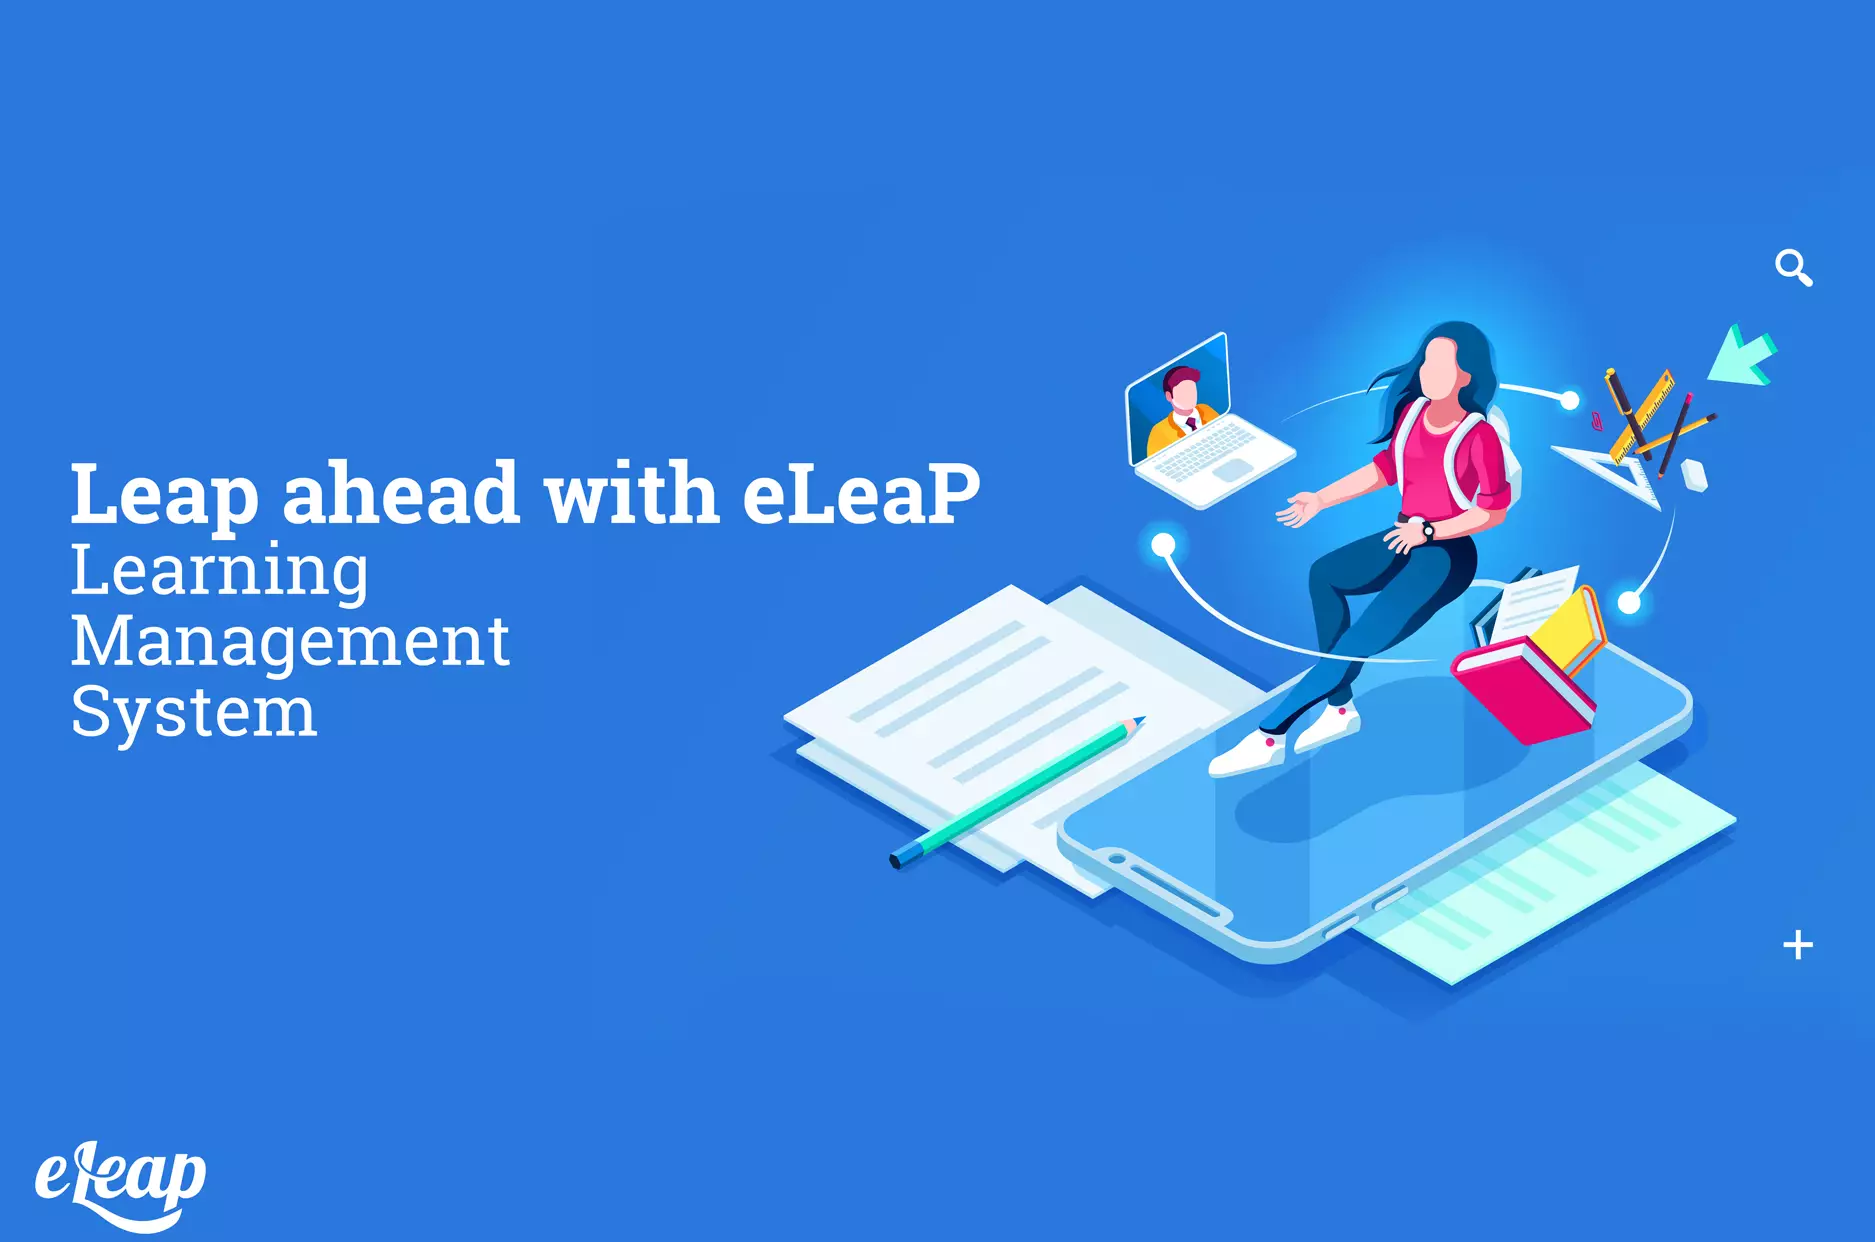 Leap ahead with eLeaP